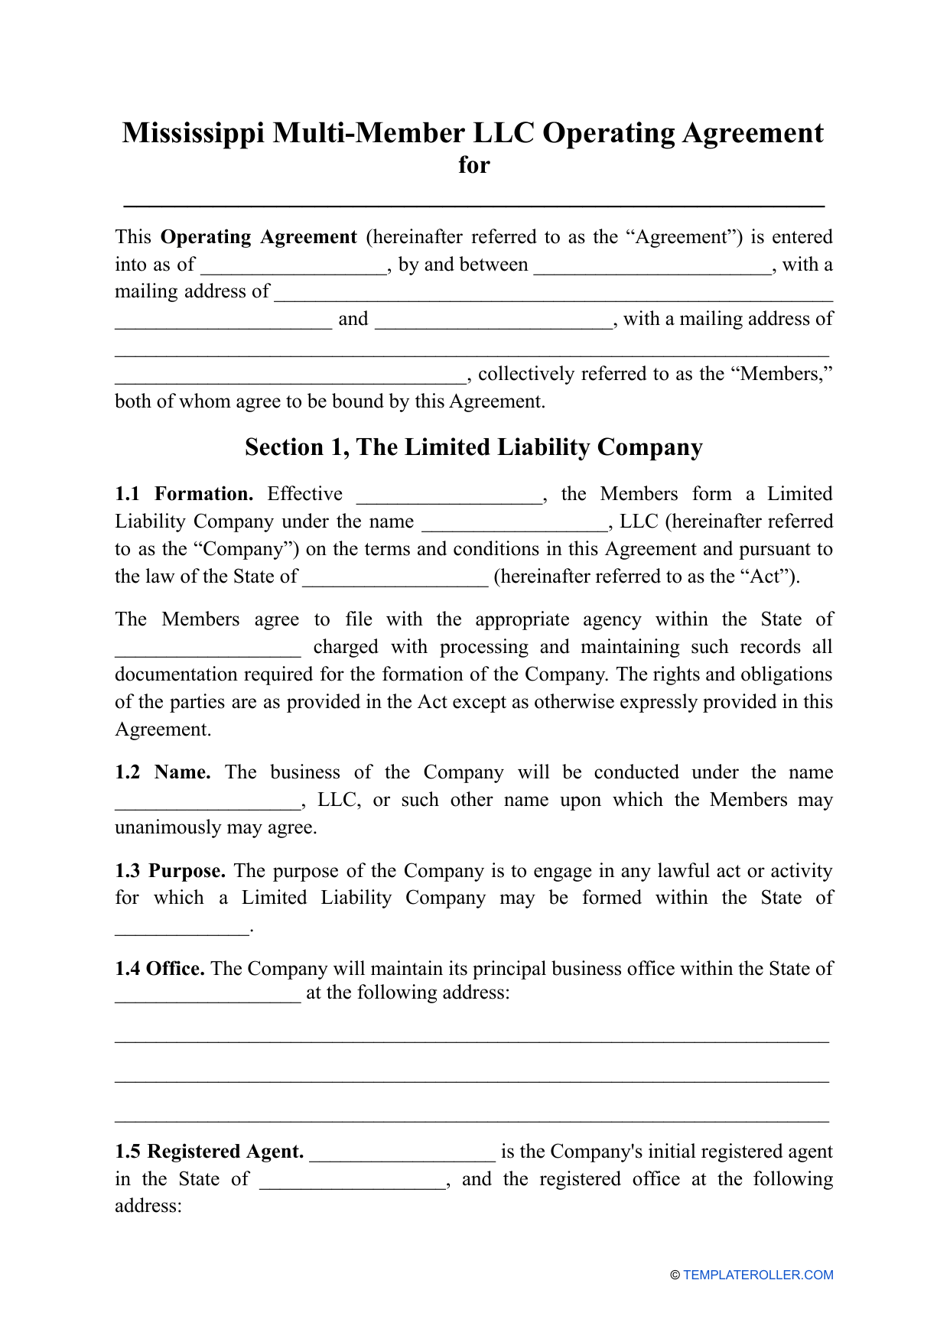 Multi-Member LLC Operating Agreement Template - Mississippi, Page 1